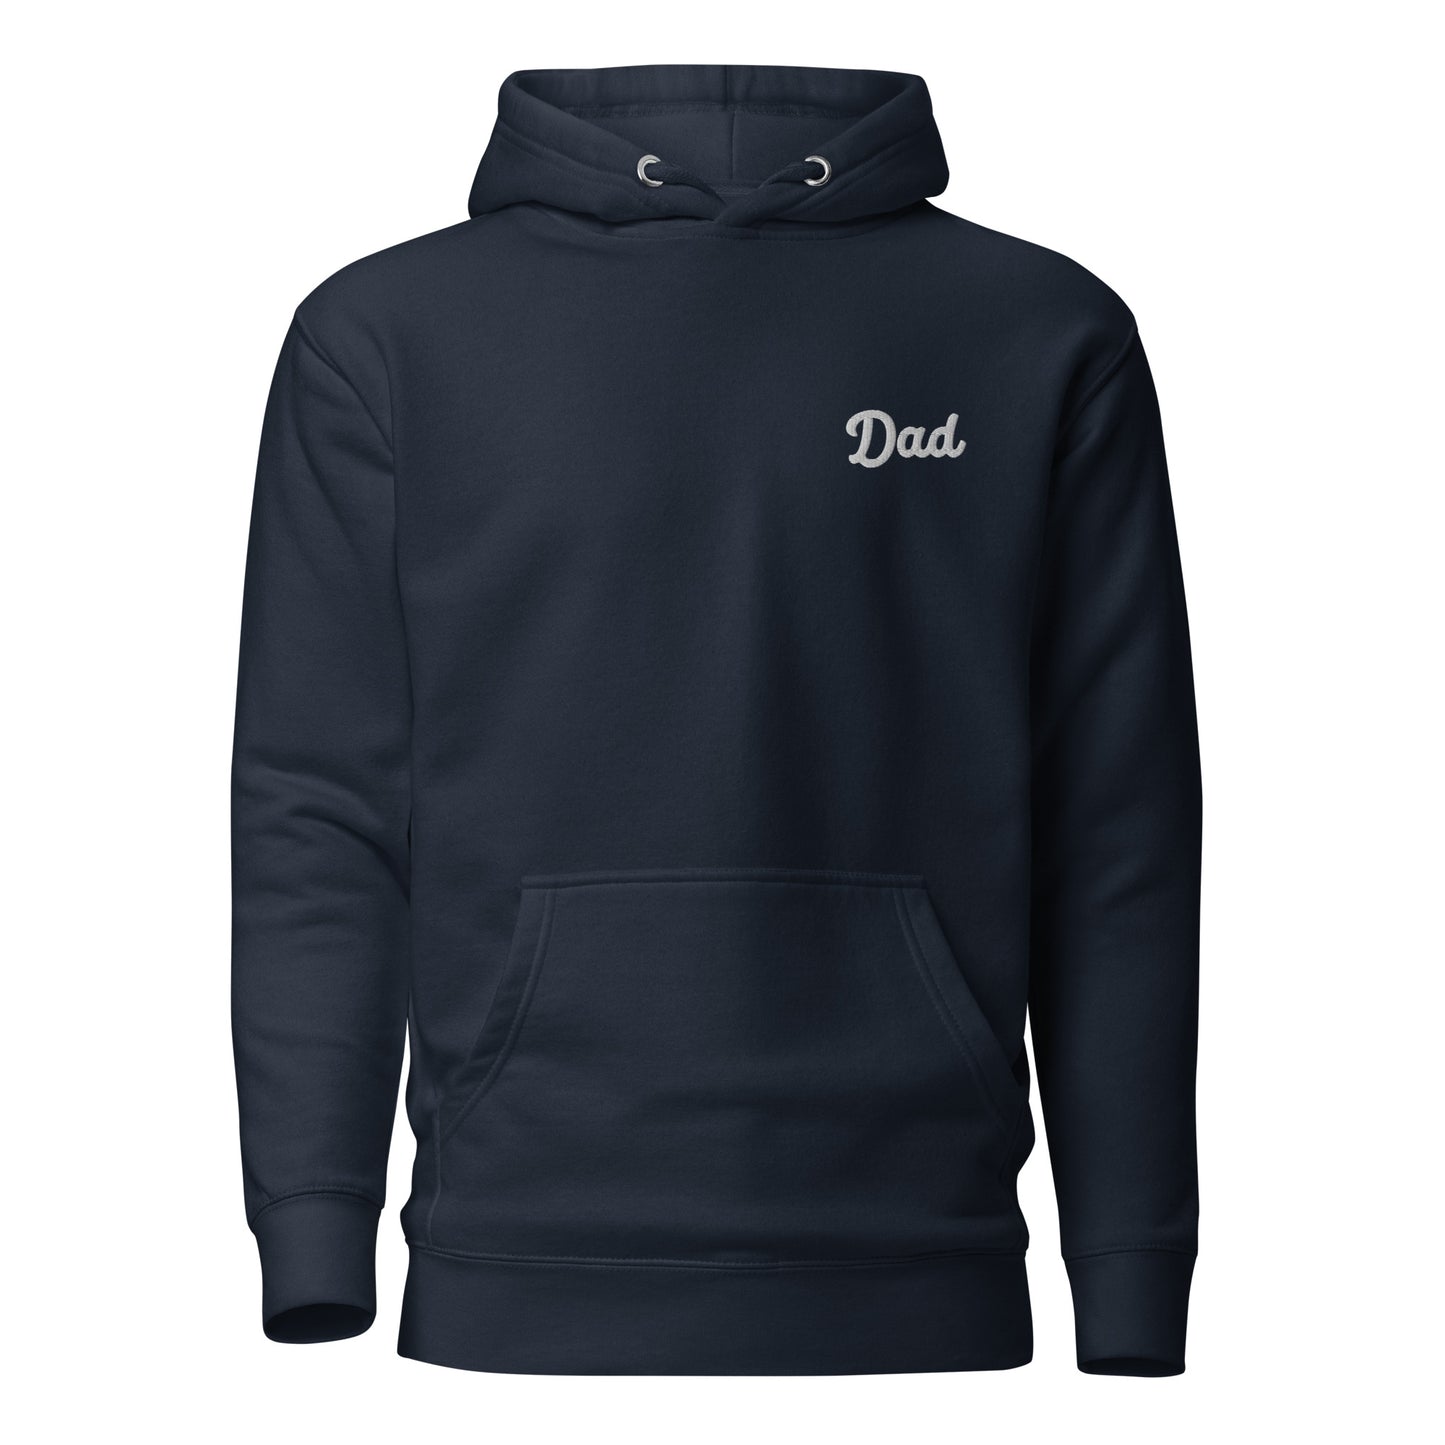 Dad Embroidered Hoodie